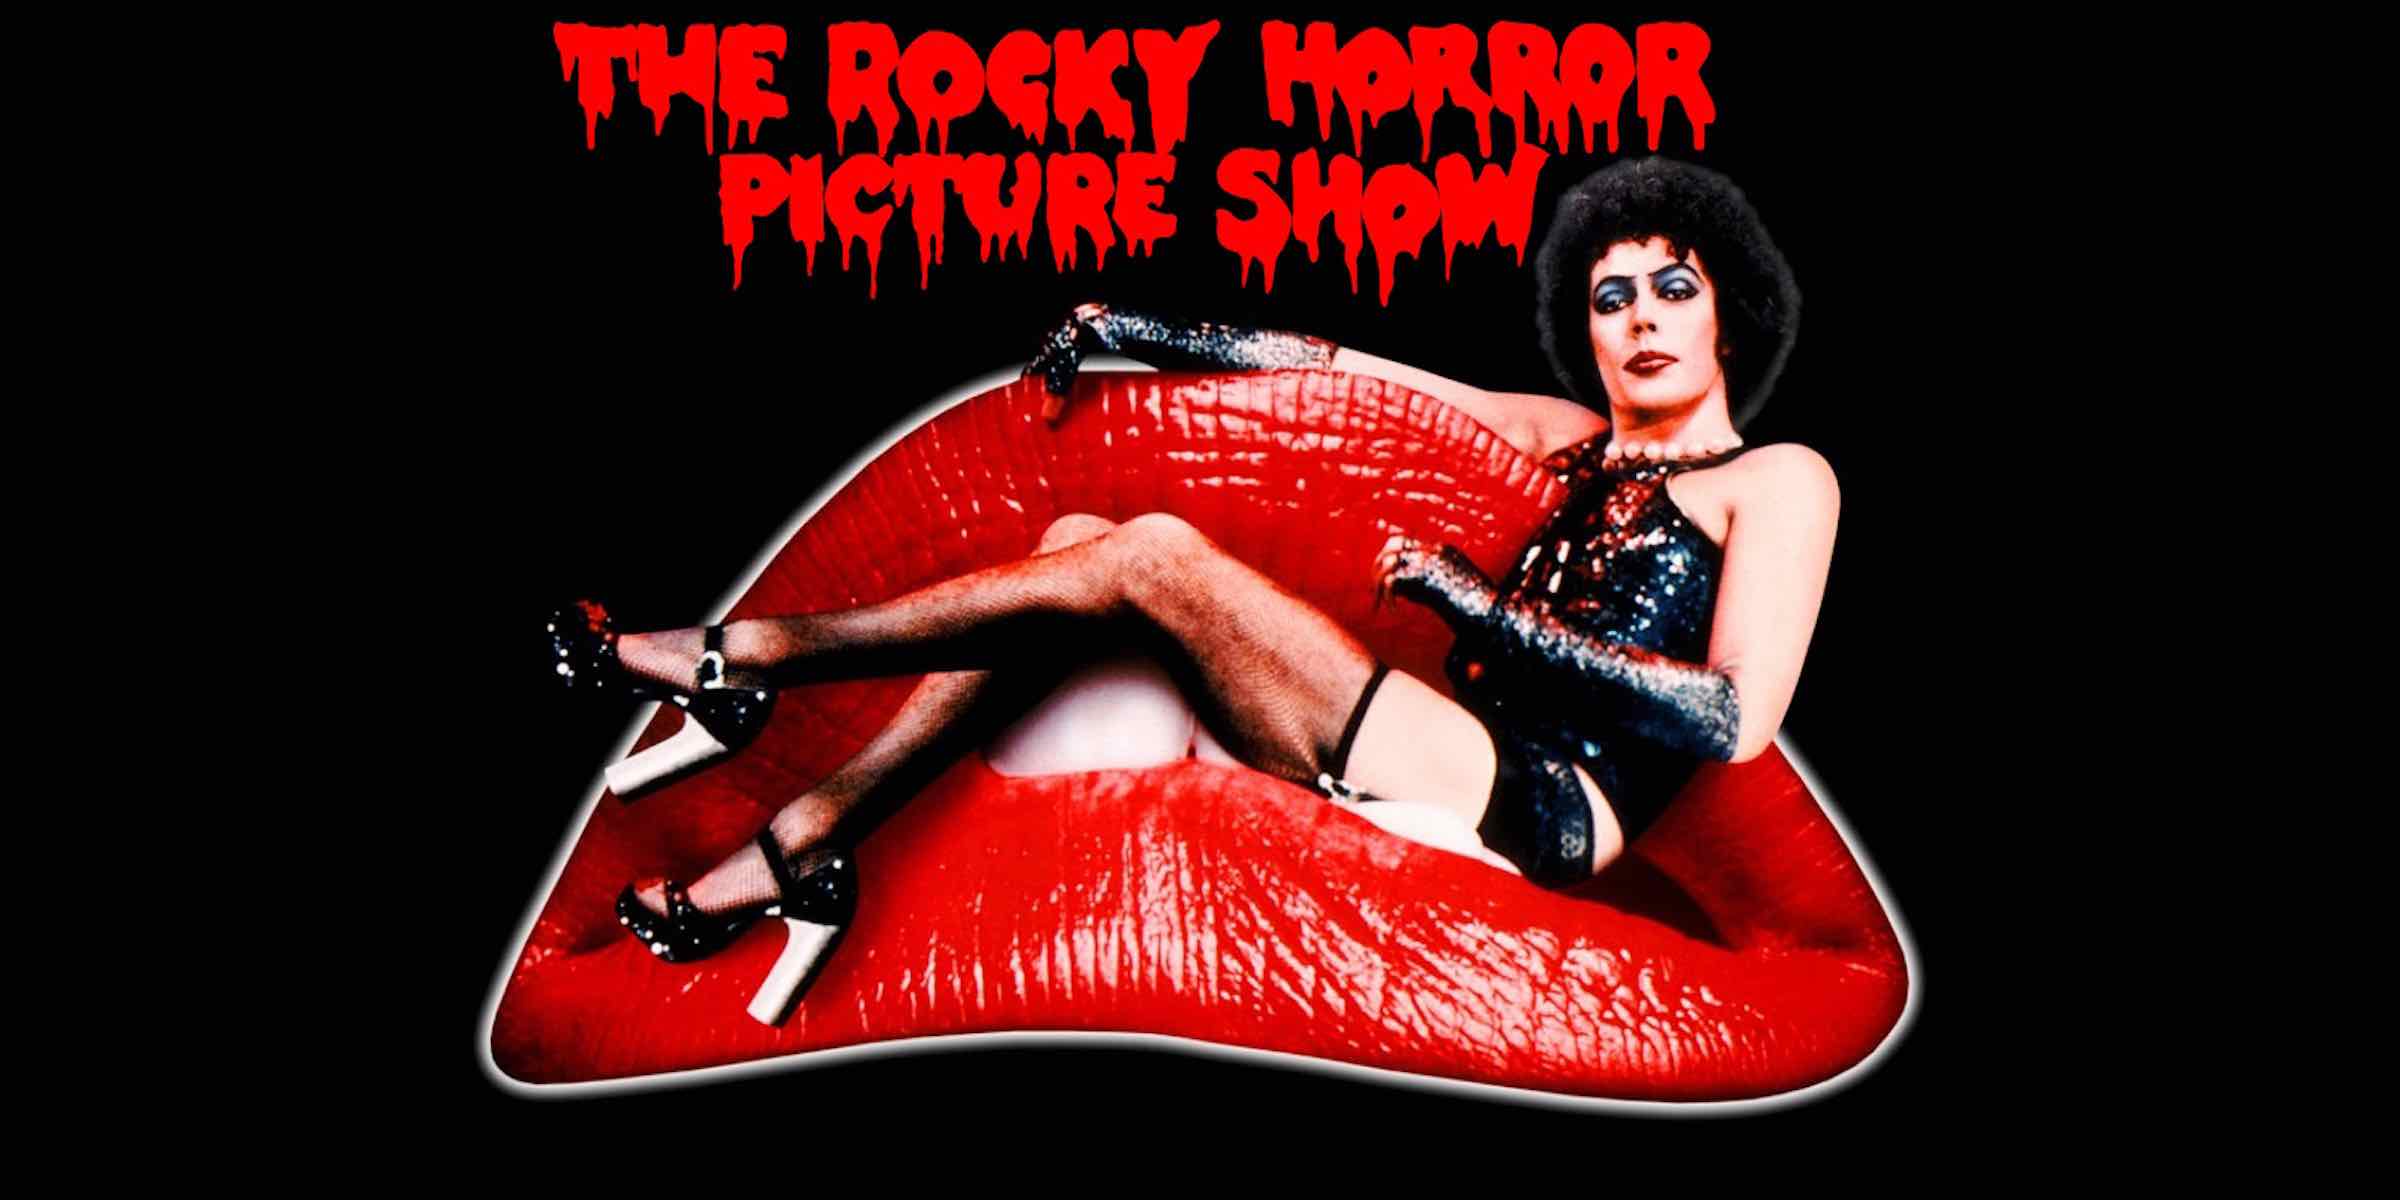 Let's do the time warp again! 'The Rocky Horror Picture Show' is as iconic as ever. If you love Tim Curry in this amazing film, then you'll love this quiz.